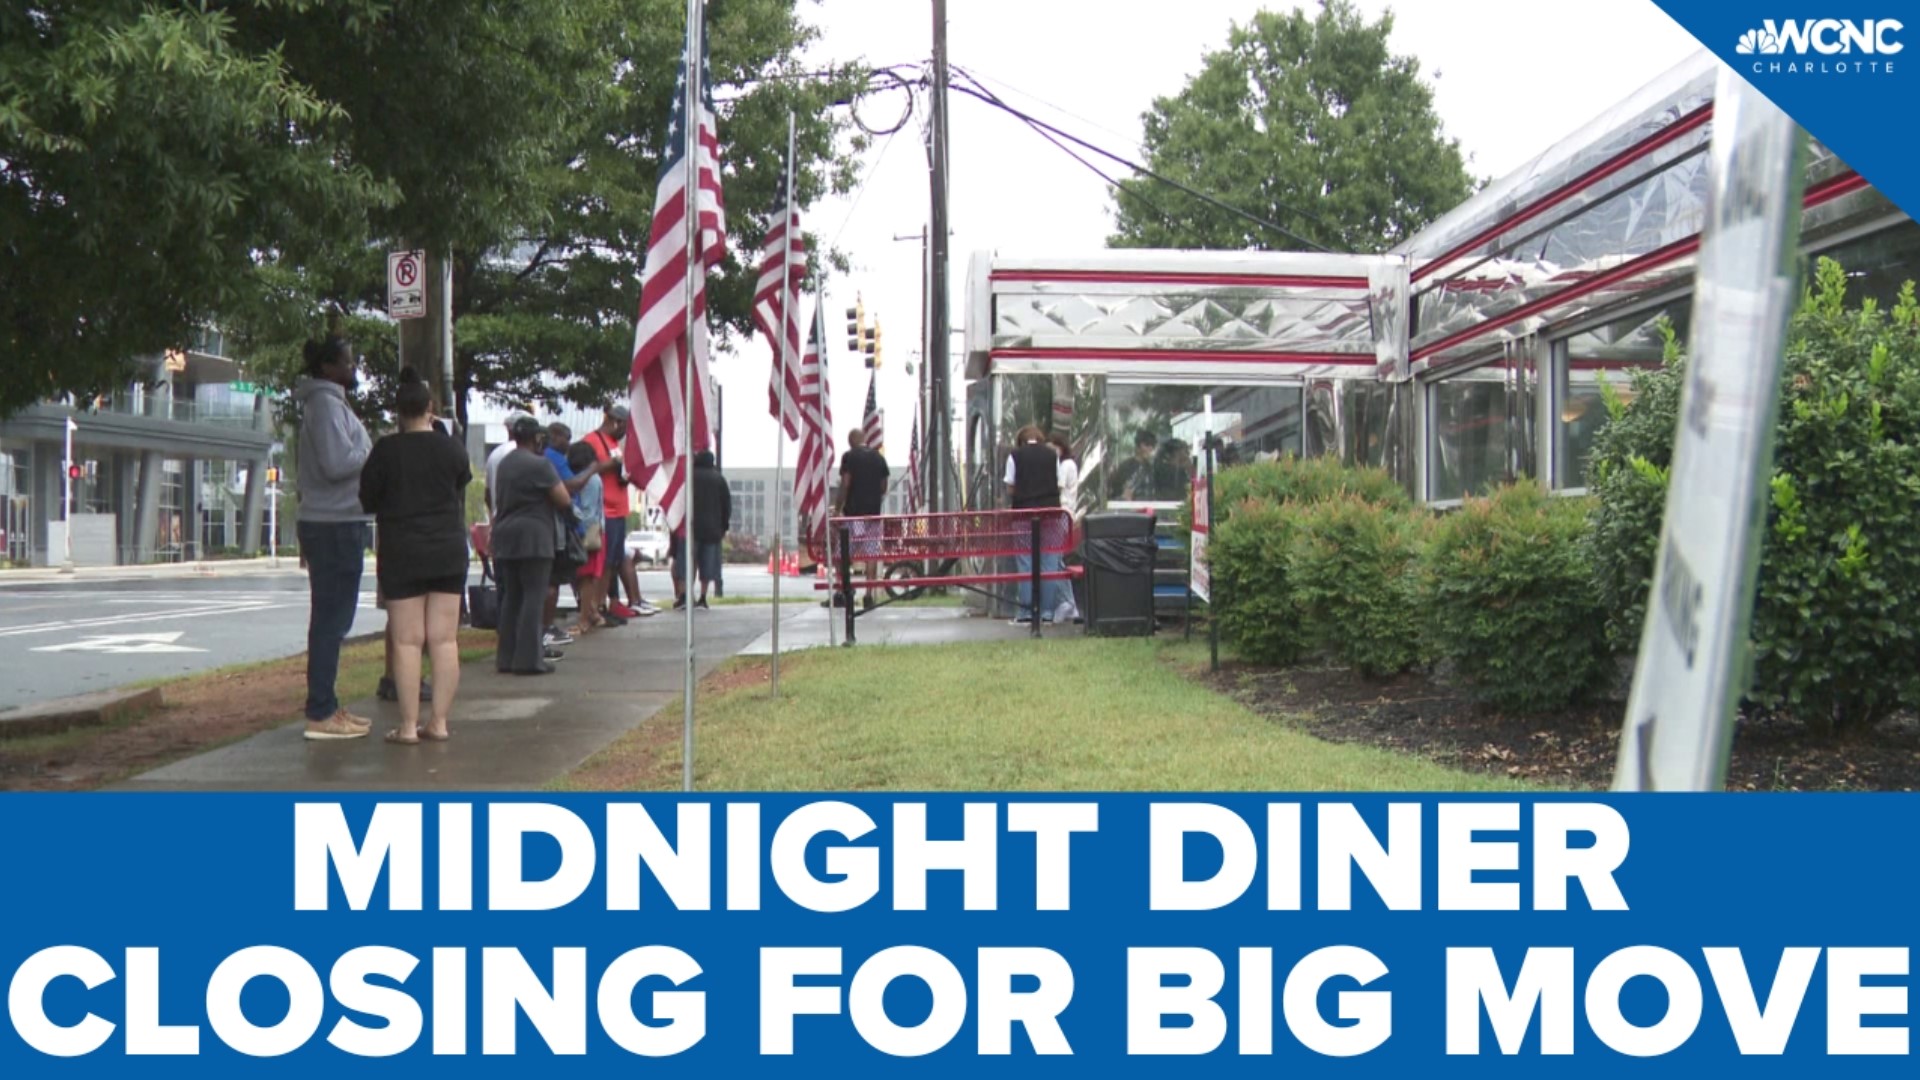 Midnight Diner, the popular '50s-style diner in Charlotte's South End, will be closing after Labor Day ahead of its relocation to Uptown.